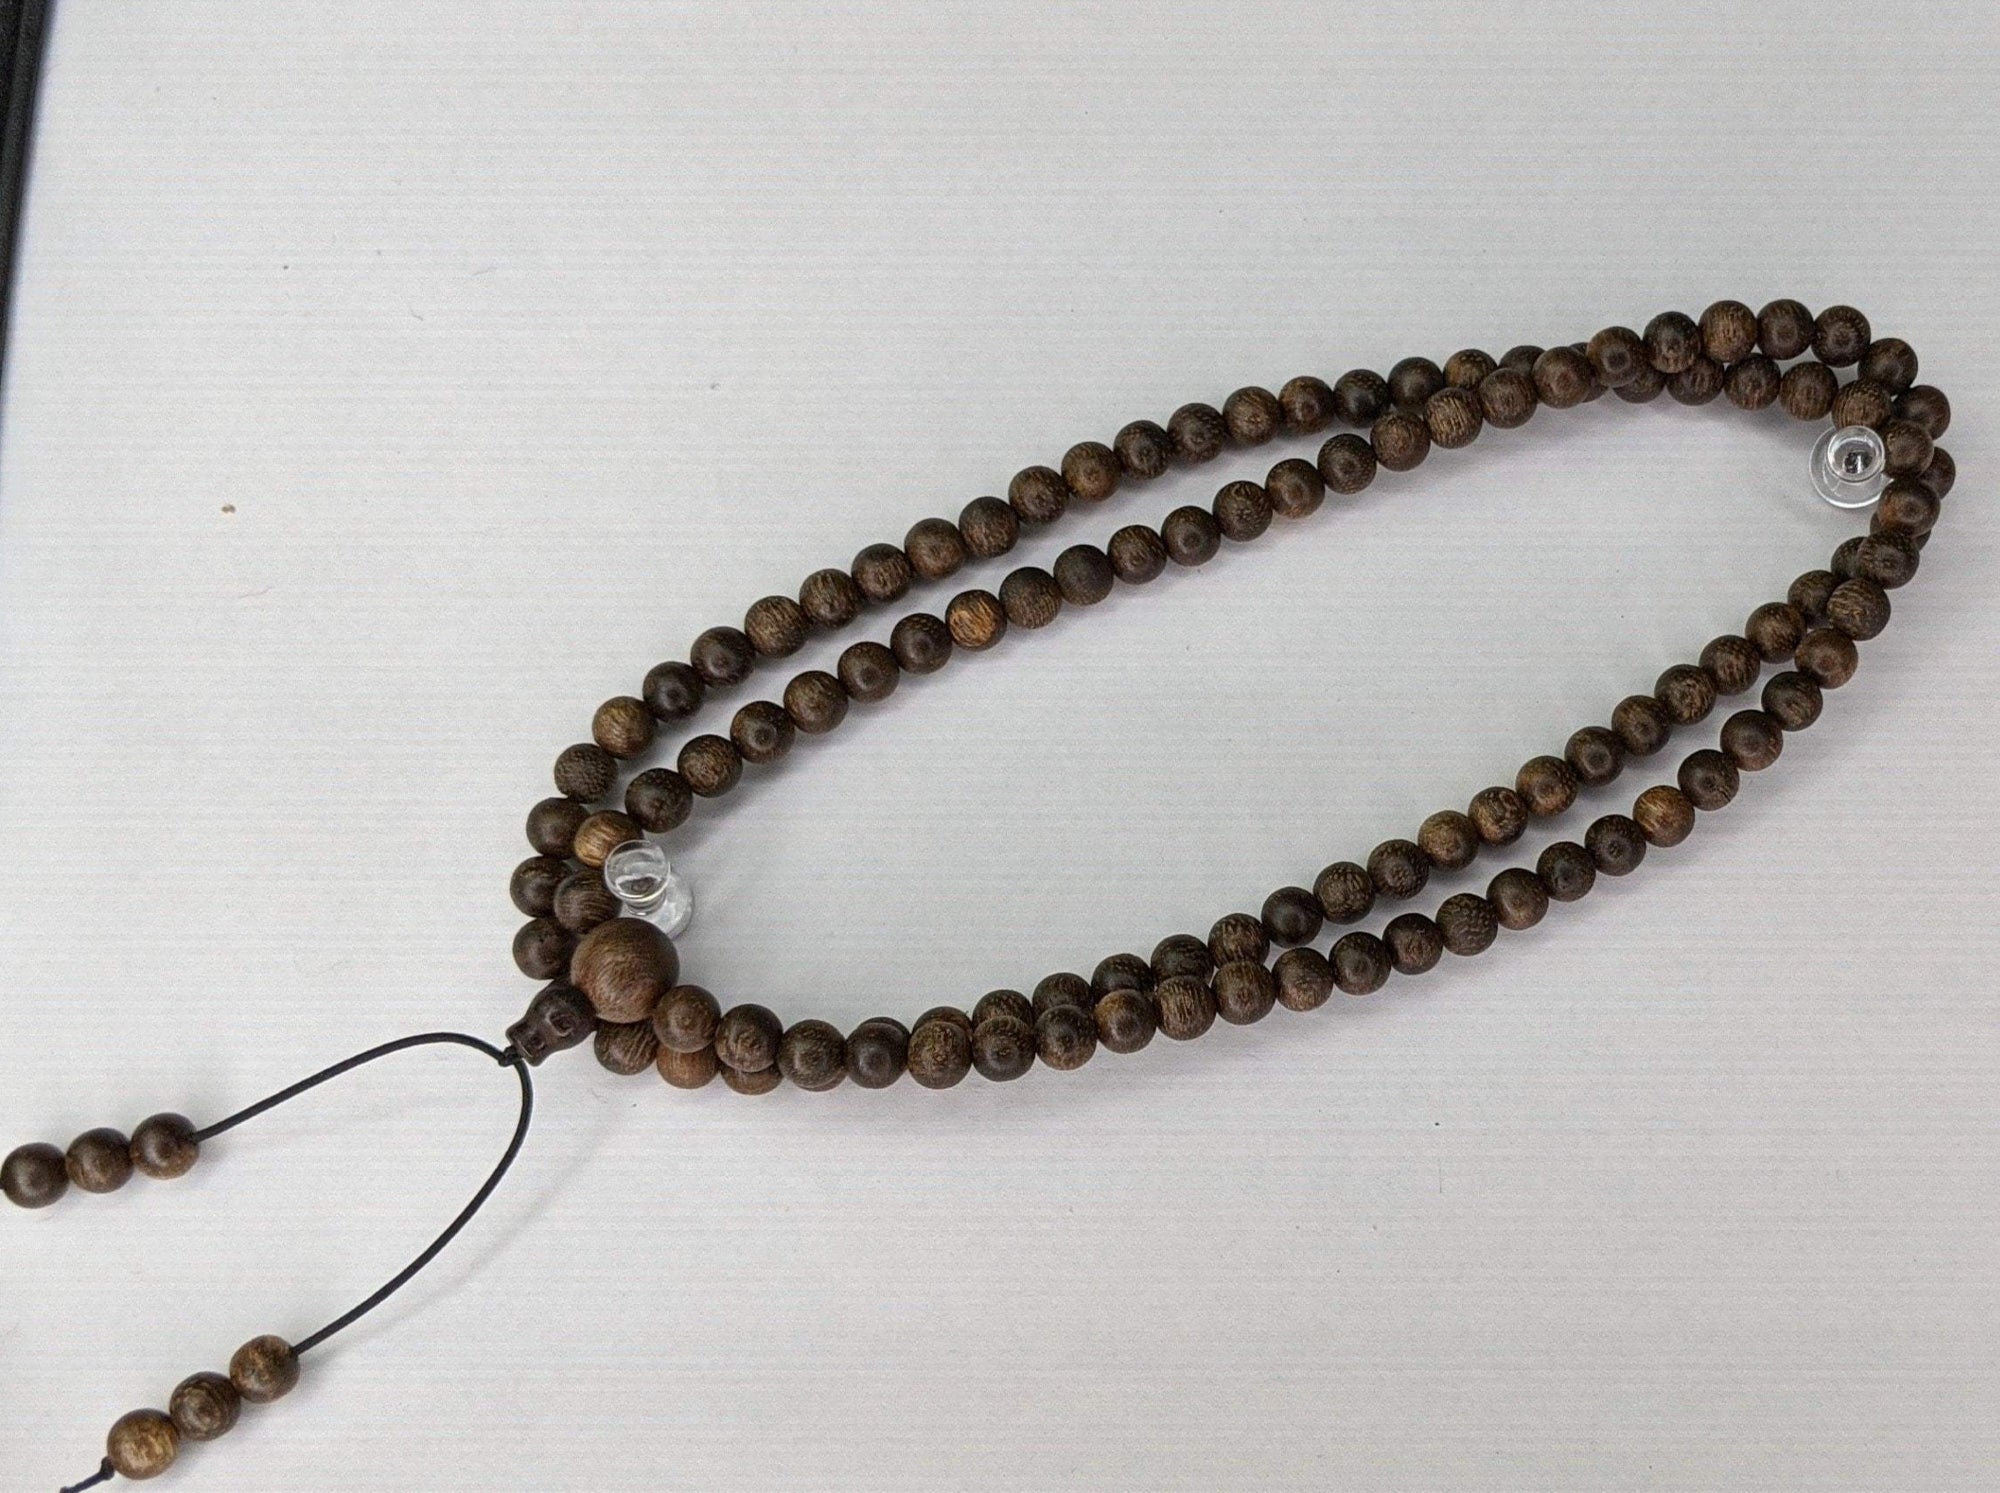 Fortune and Wealth Attractor - Wild Agarwood 108 mala from Borneo 6mm 13g -